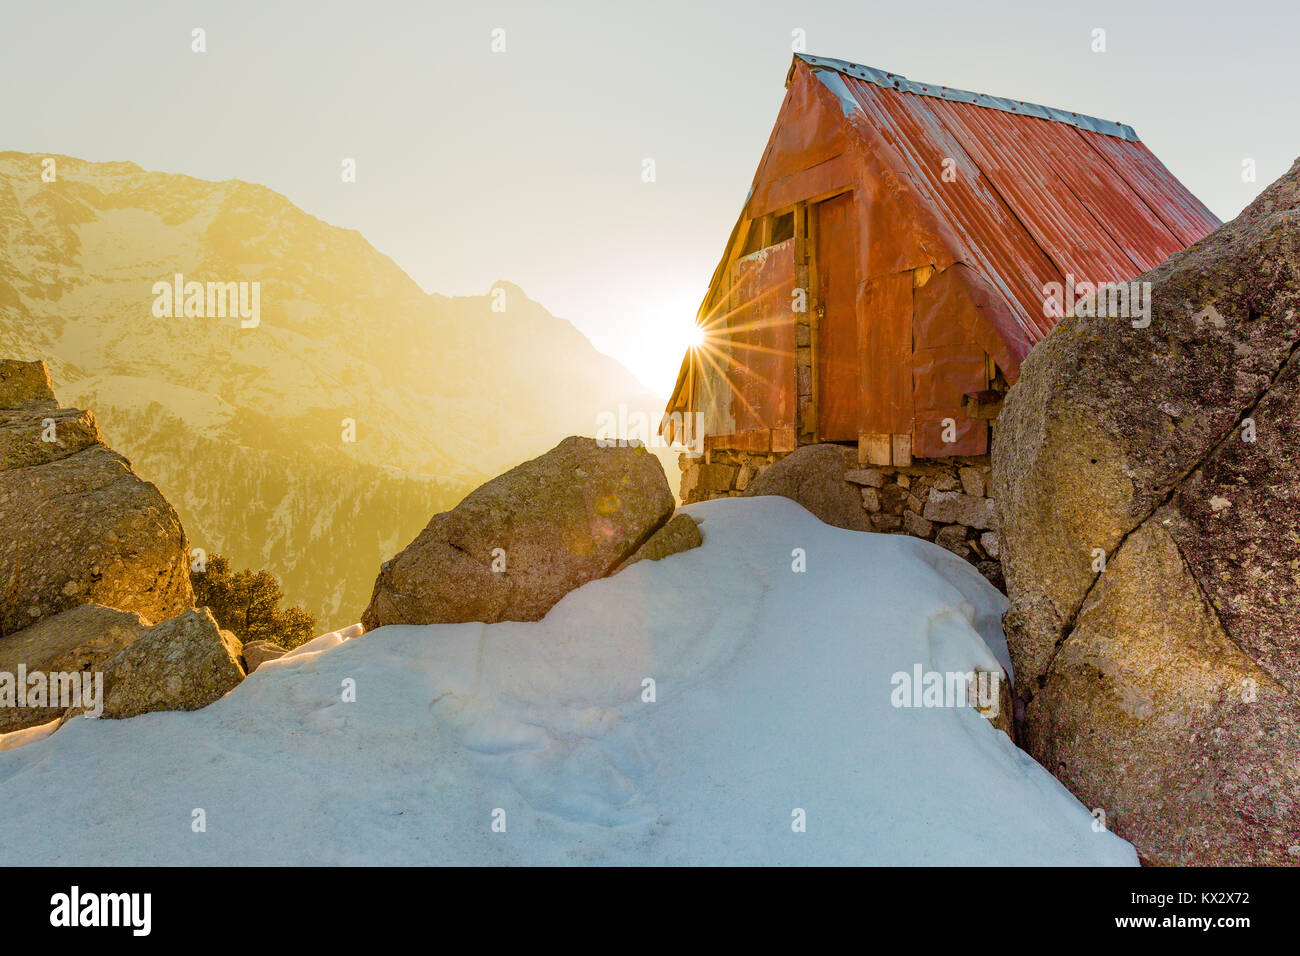 Serene and beautiful Cabin in the snow mountains at Triund hill top, Mcleod ganj, Dharamsala, India during amazing sunrise from behind the mountain Stock Photo